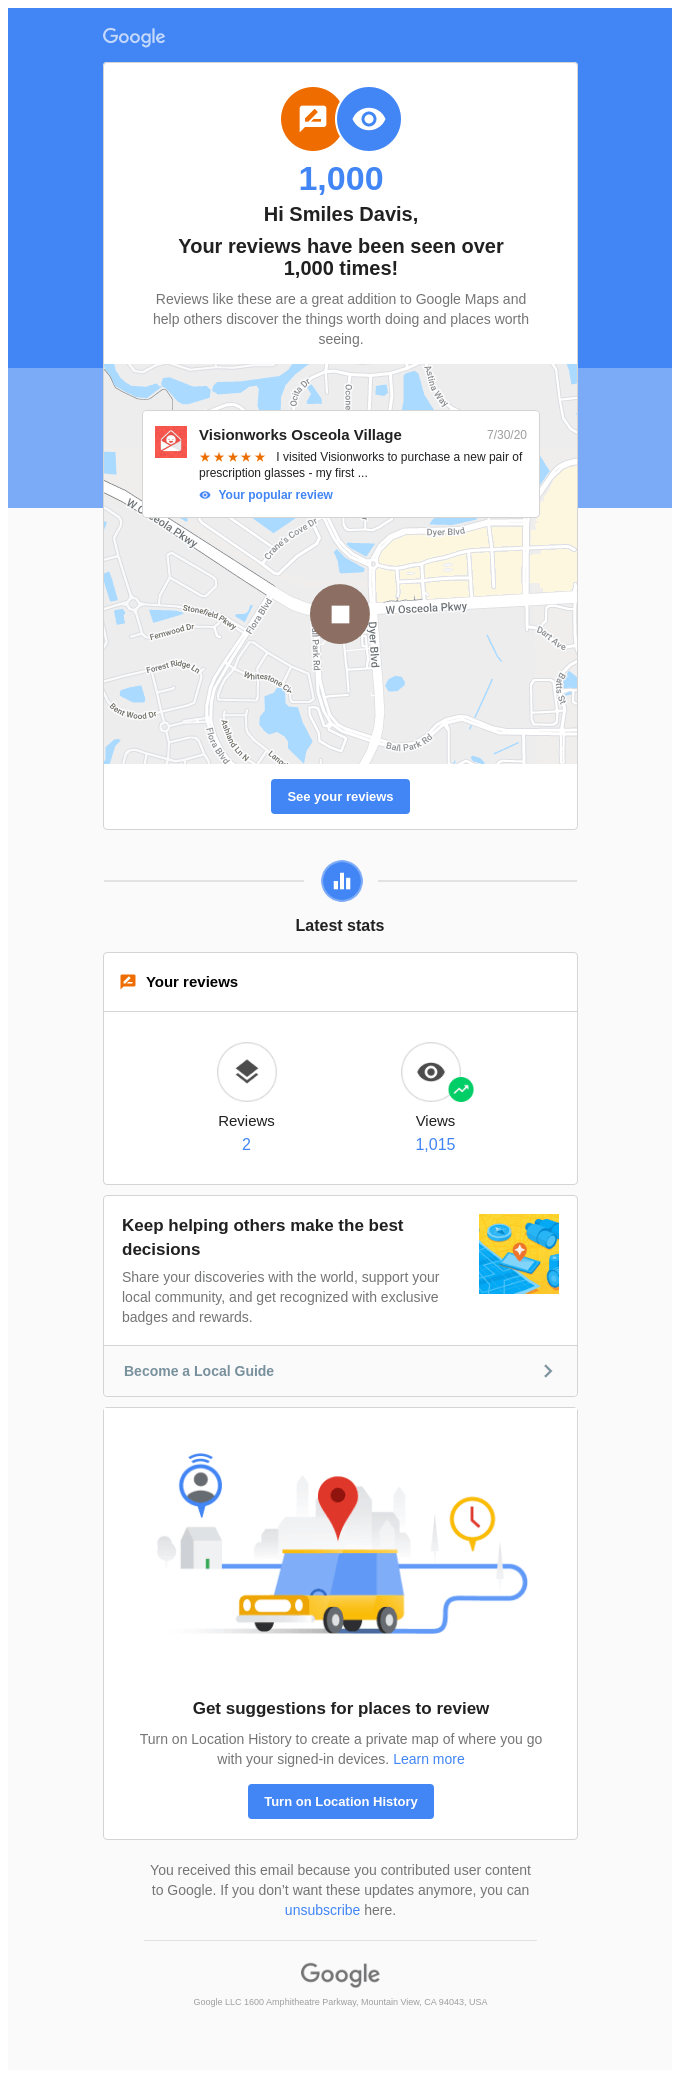 Your reviews are really popular on Google Maps!